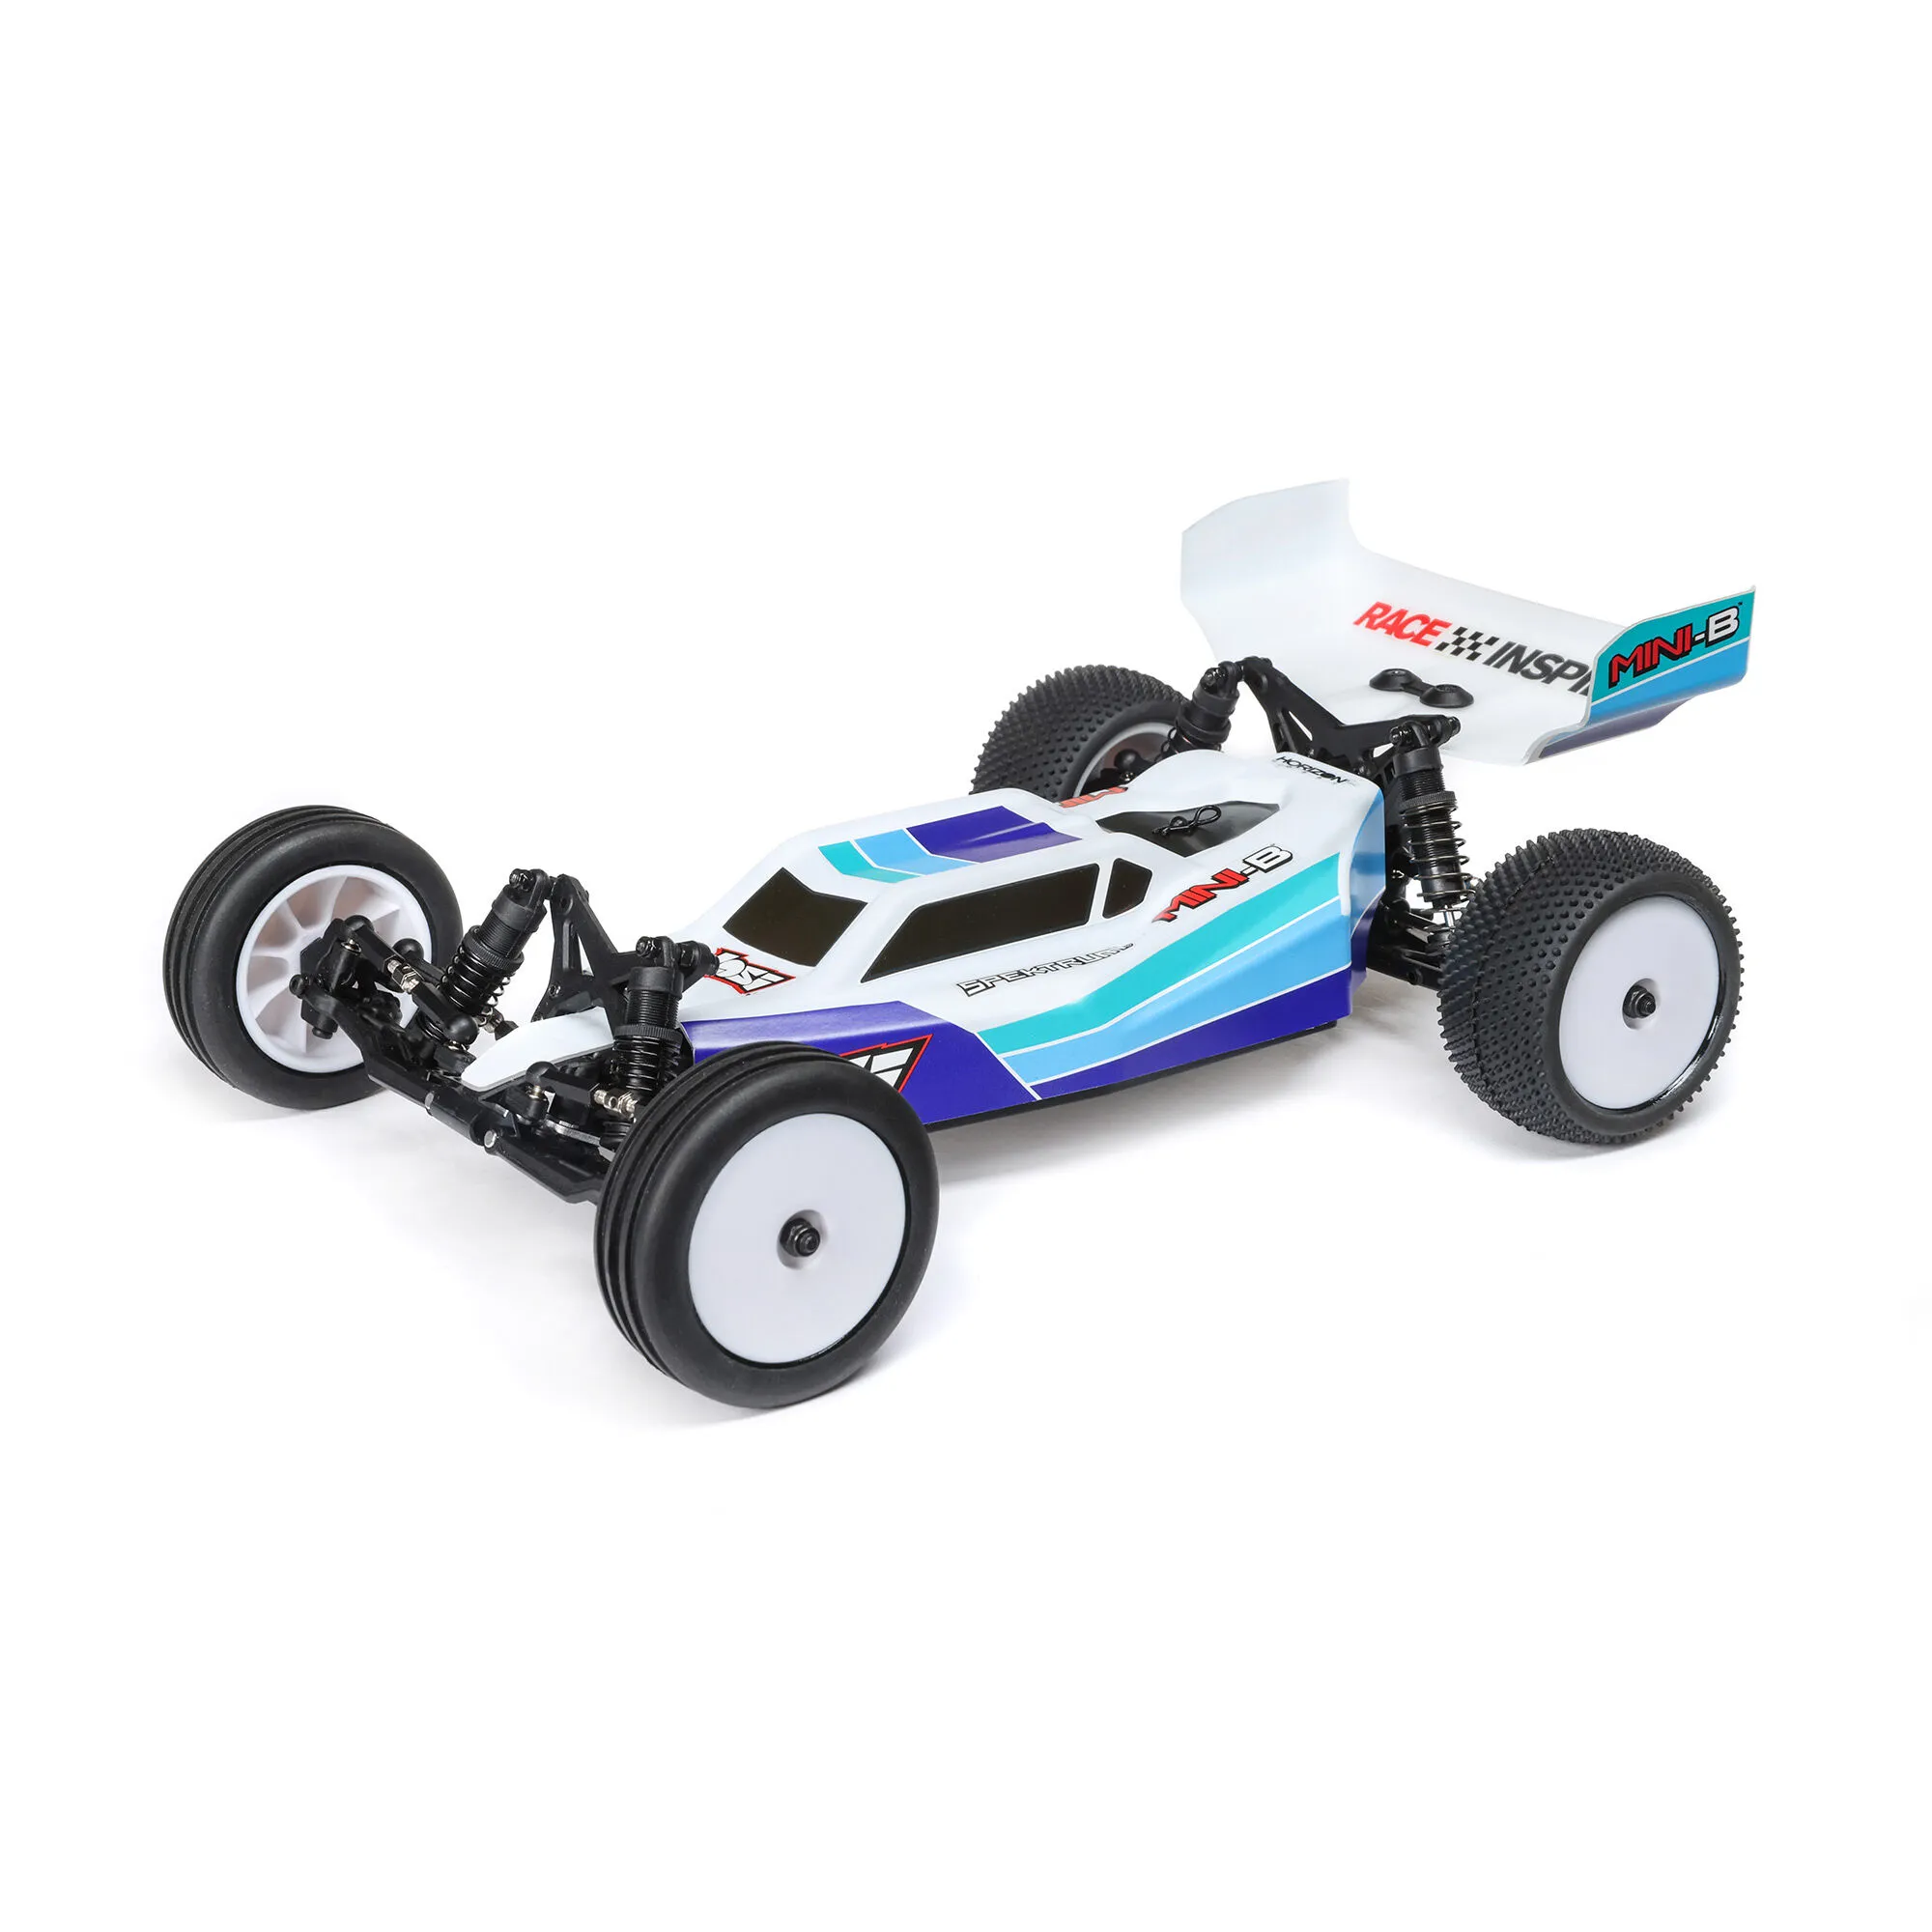 Losi Mini-B 1/16 Brushless 2WD Buggy RTR, Blue, LOS01024T2